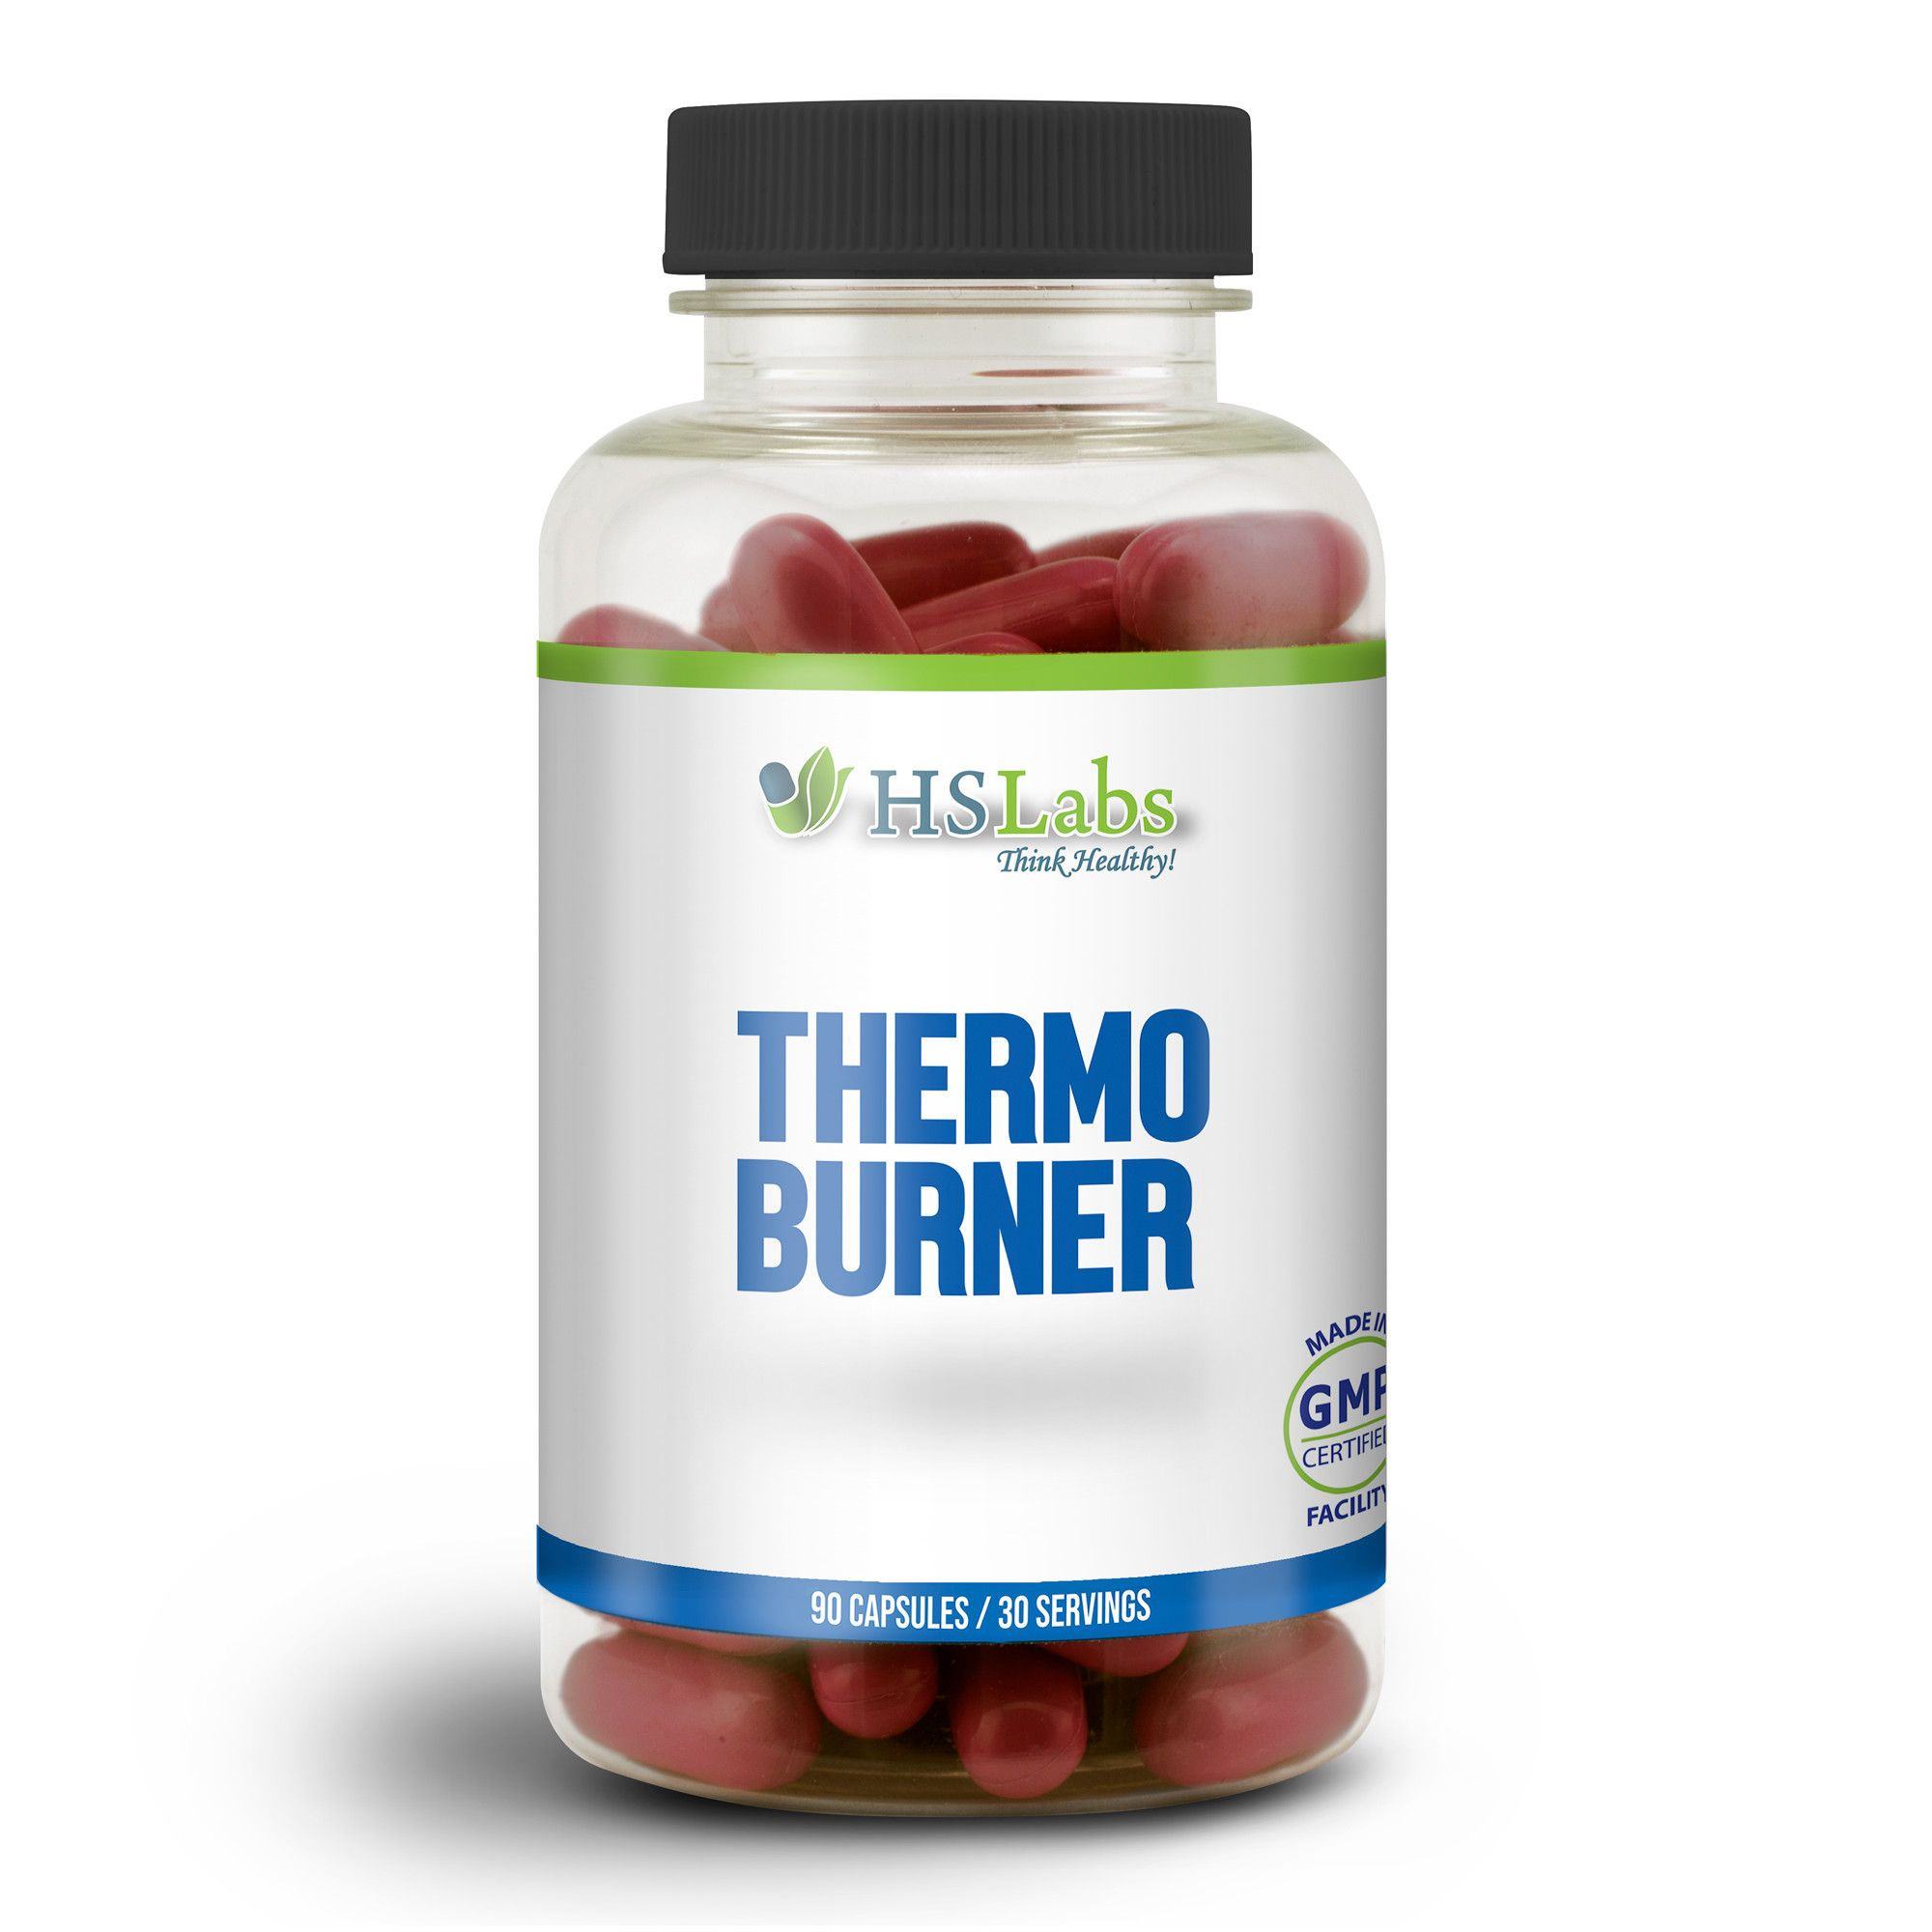 Weight Loss Supplements That Work Fat Burning
 HS LABS THERMO BURNER 90 CAPSULES Best Natural Fat